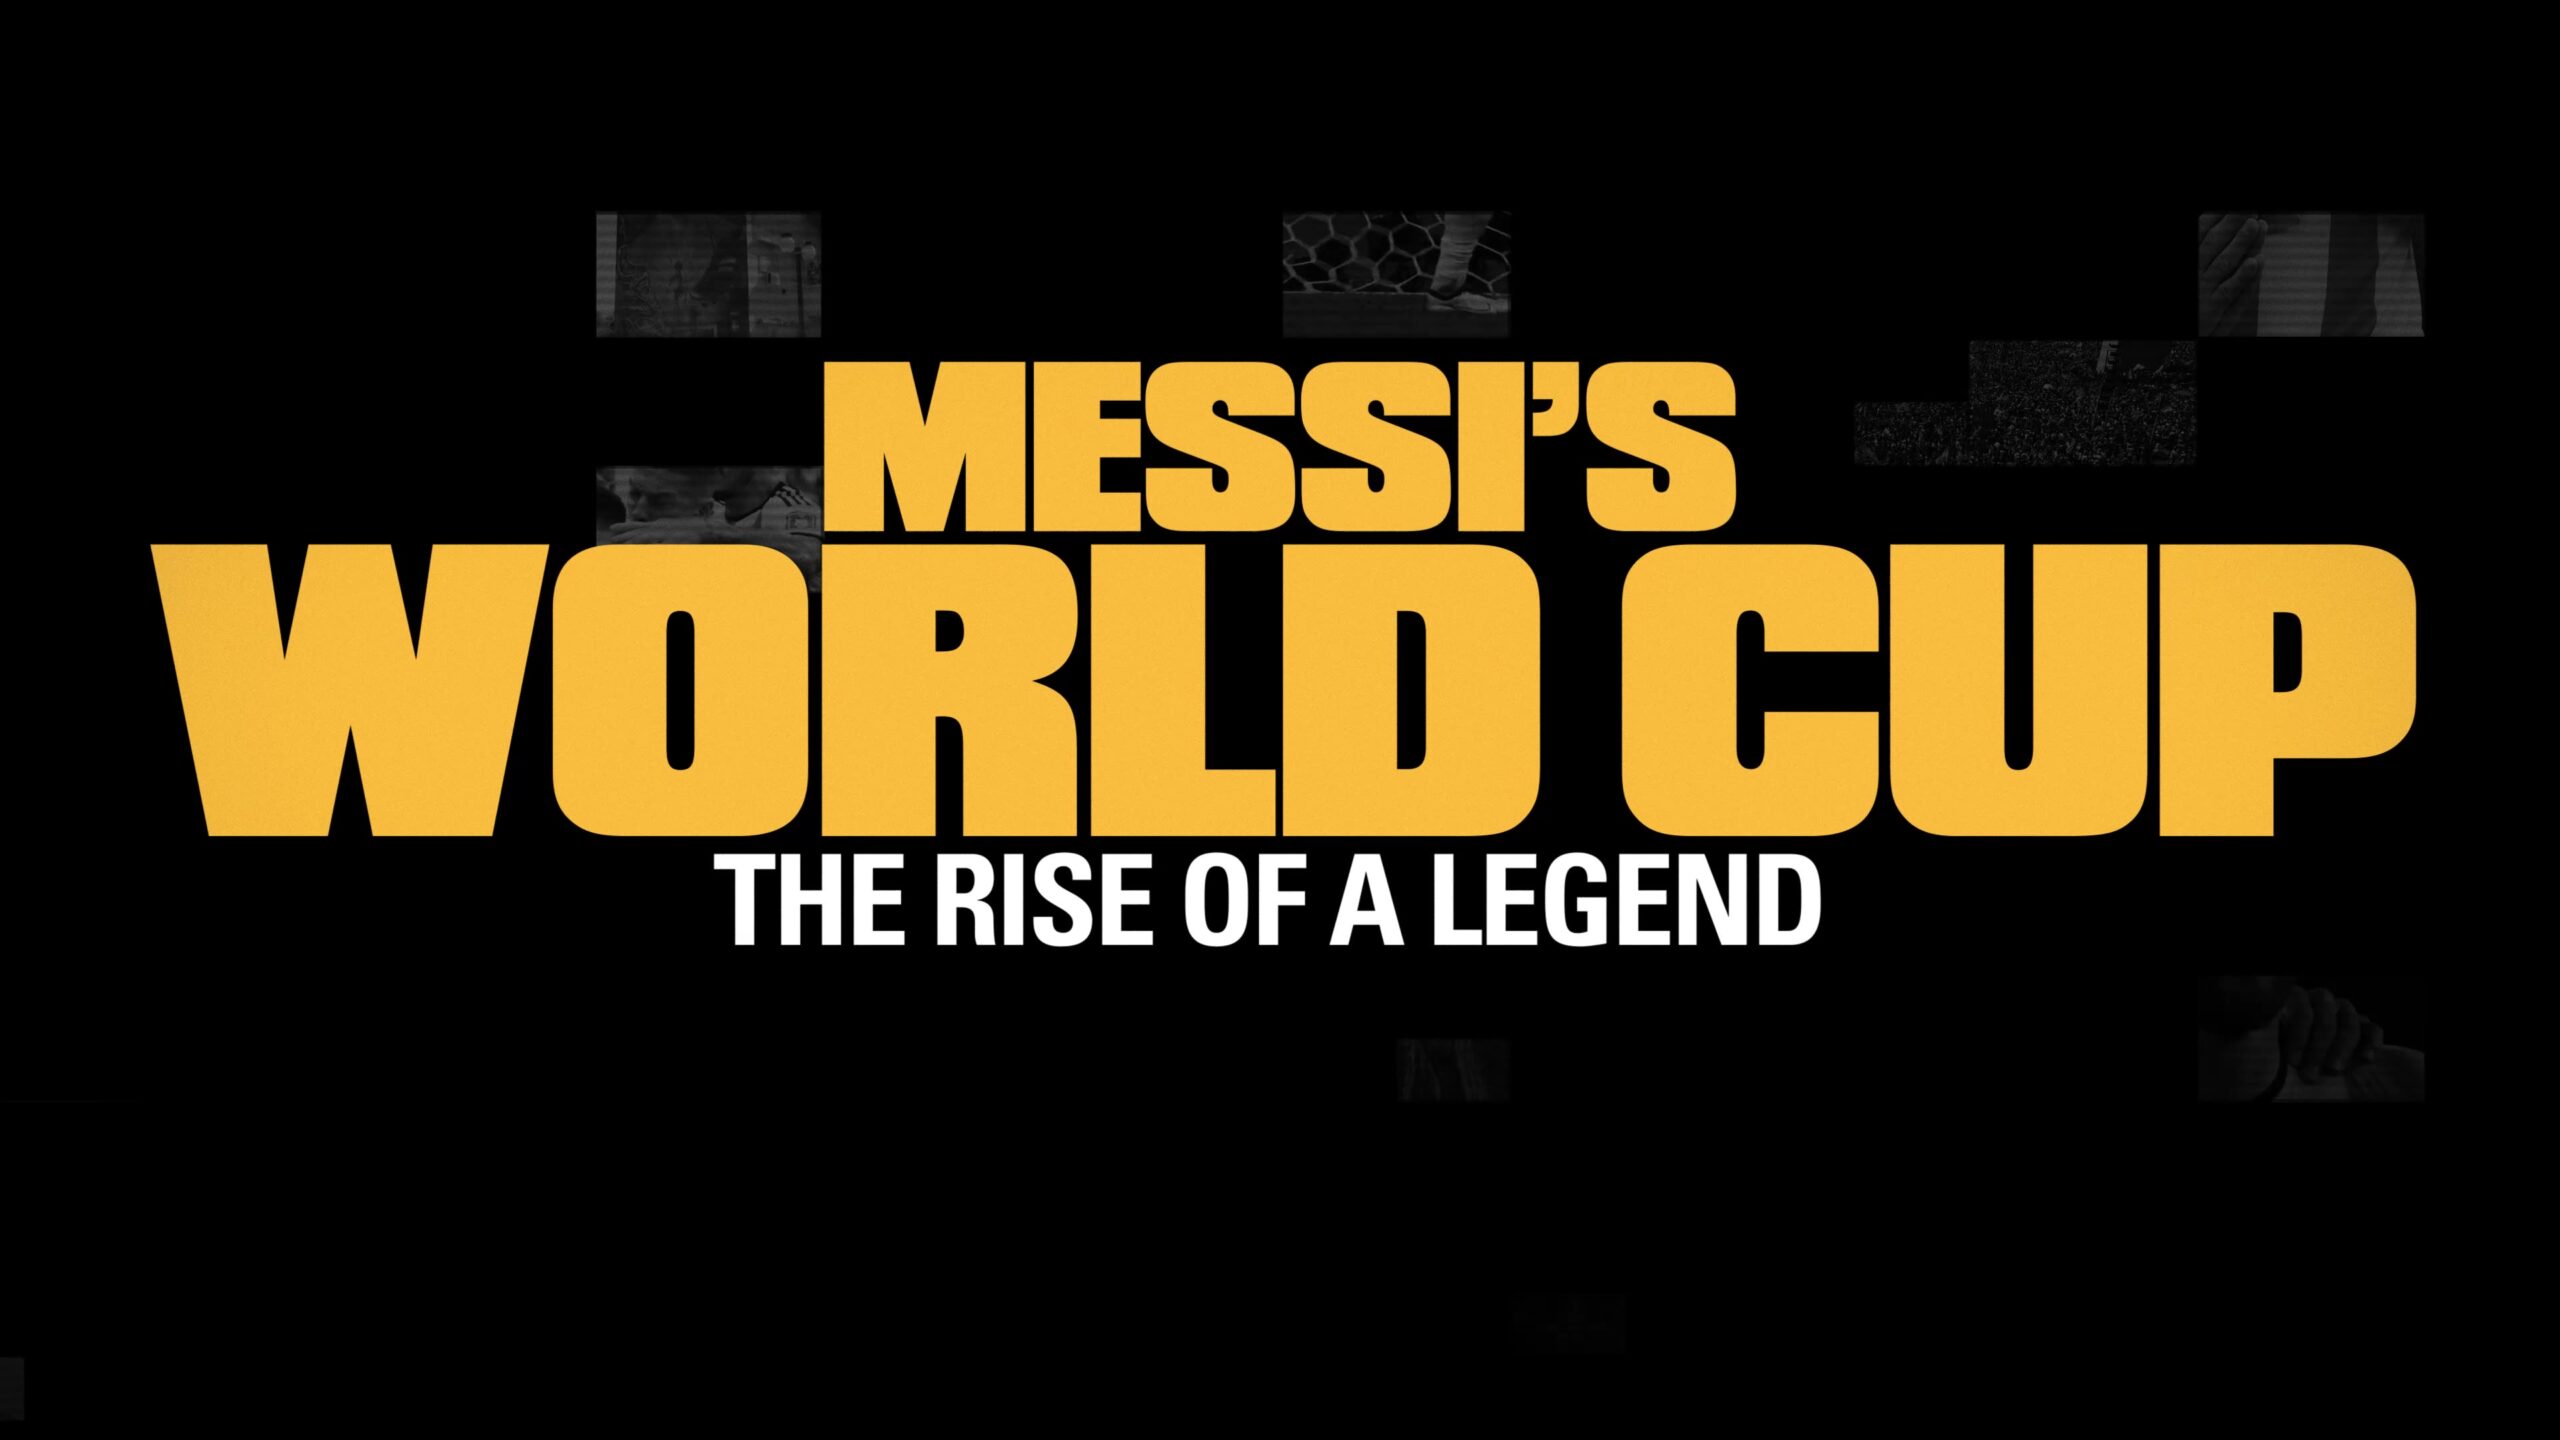 Messi’s World Cup